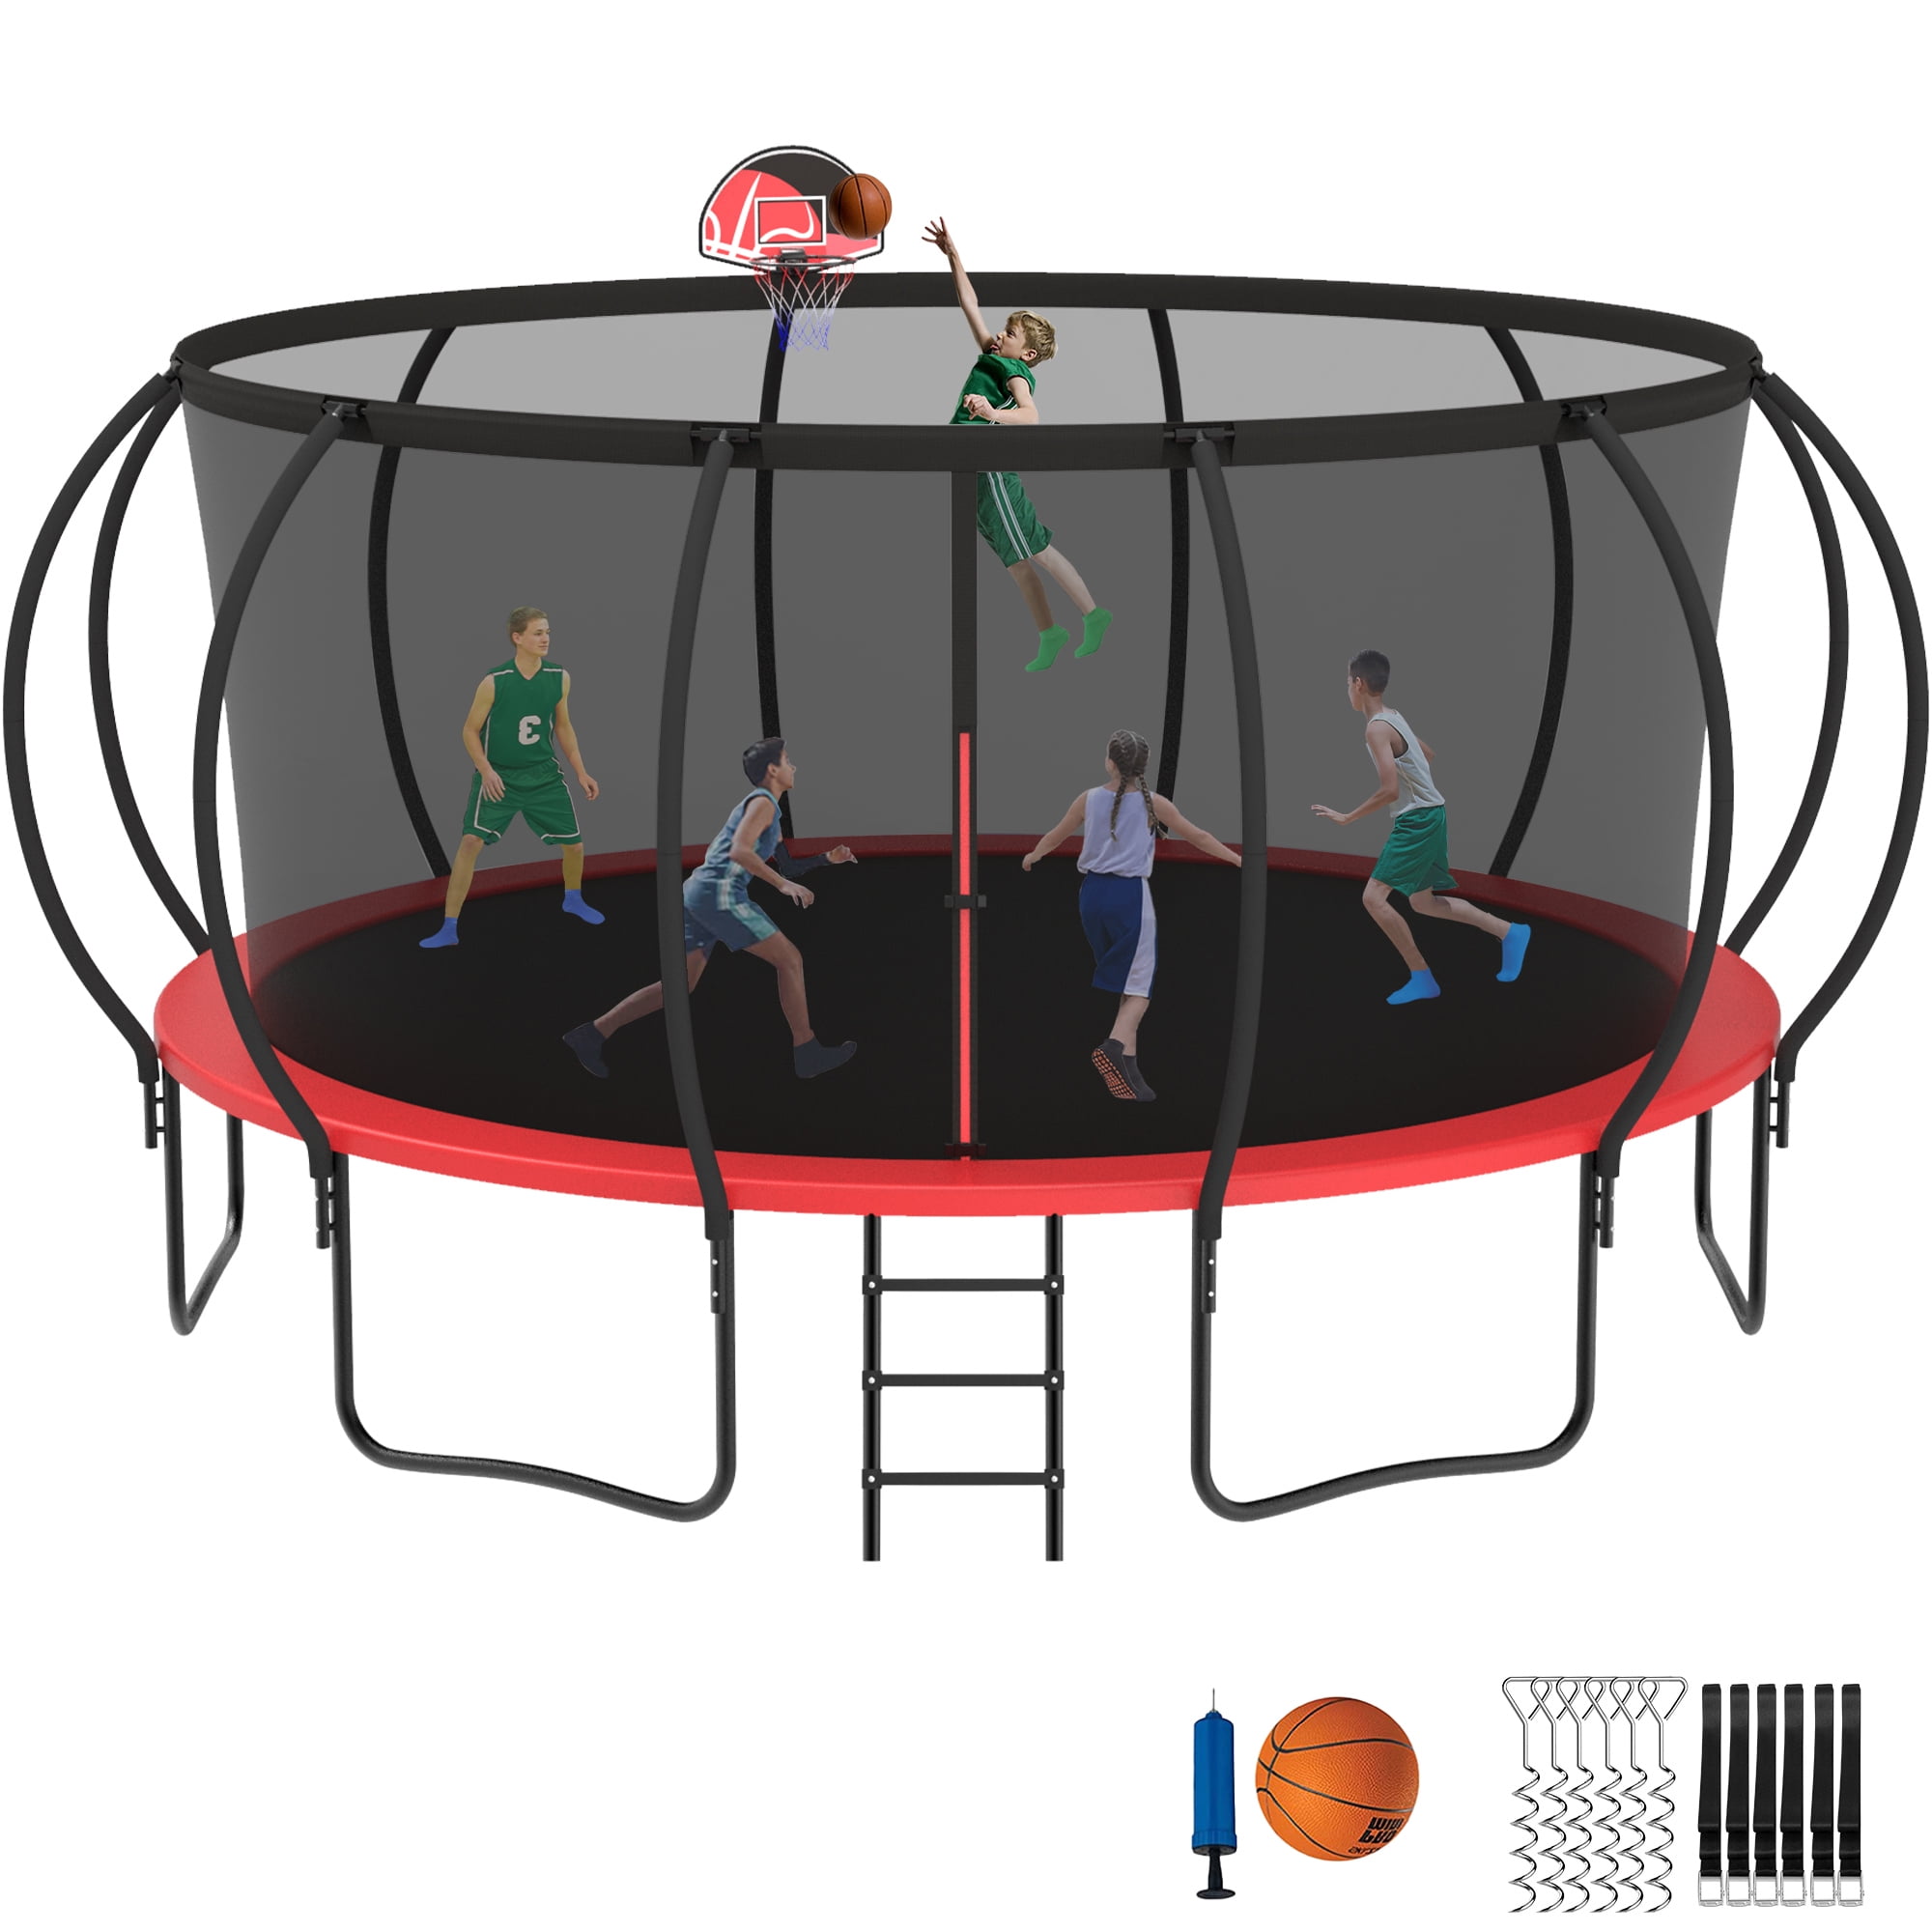 IV. Safety Measures and Precautions for Kids on Trampolines